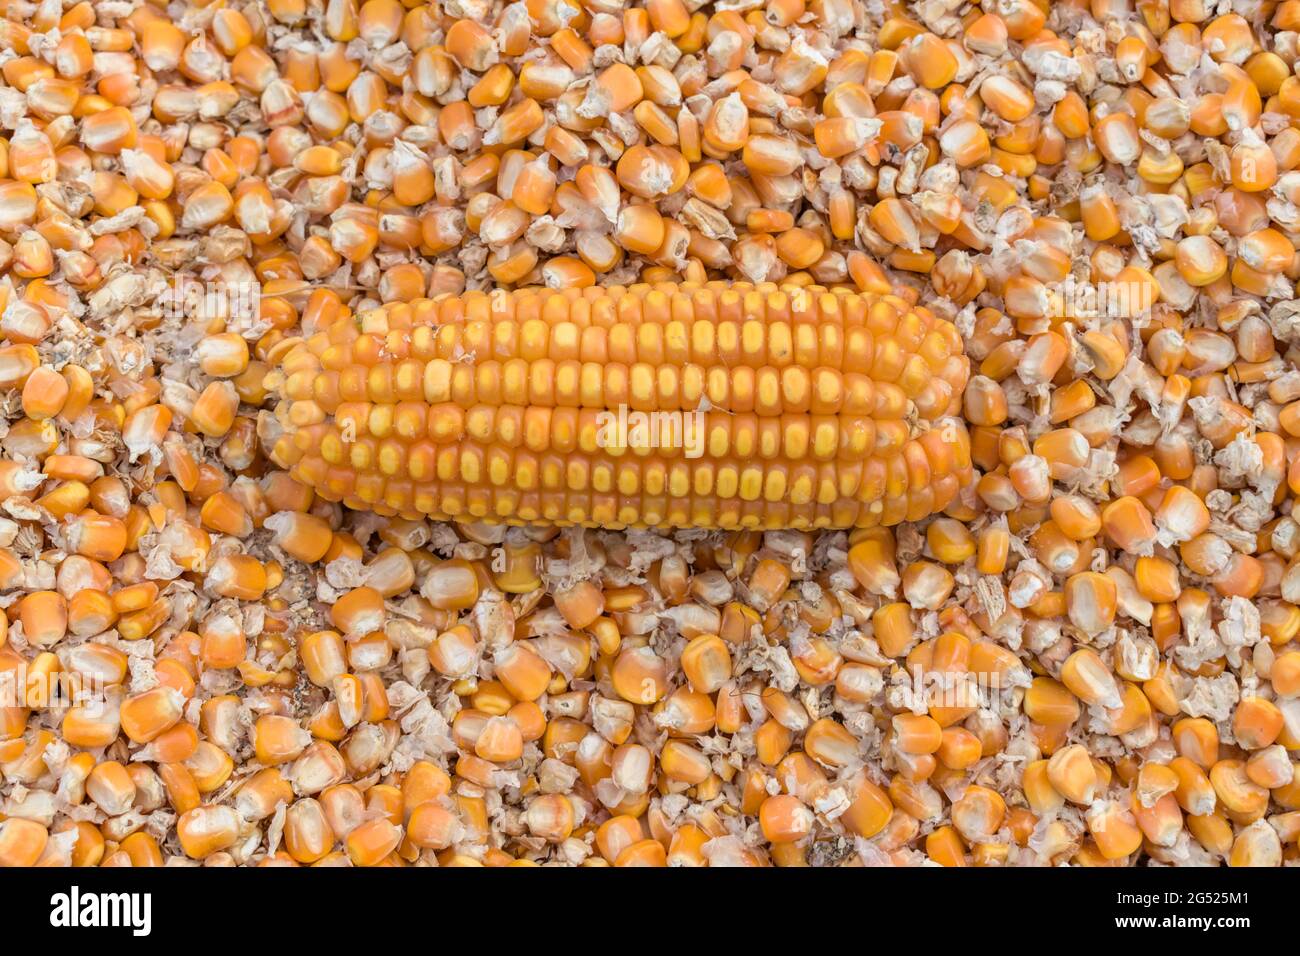 Fresh farm produce of organic corn cob or maize kernel lying on background of its separated grains for moisture removal during harvesting season. Stock Photo